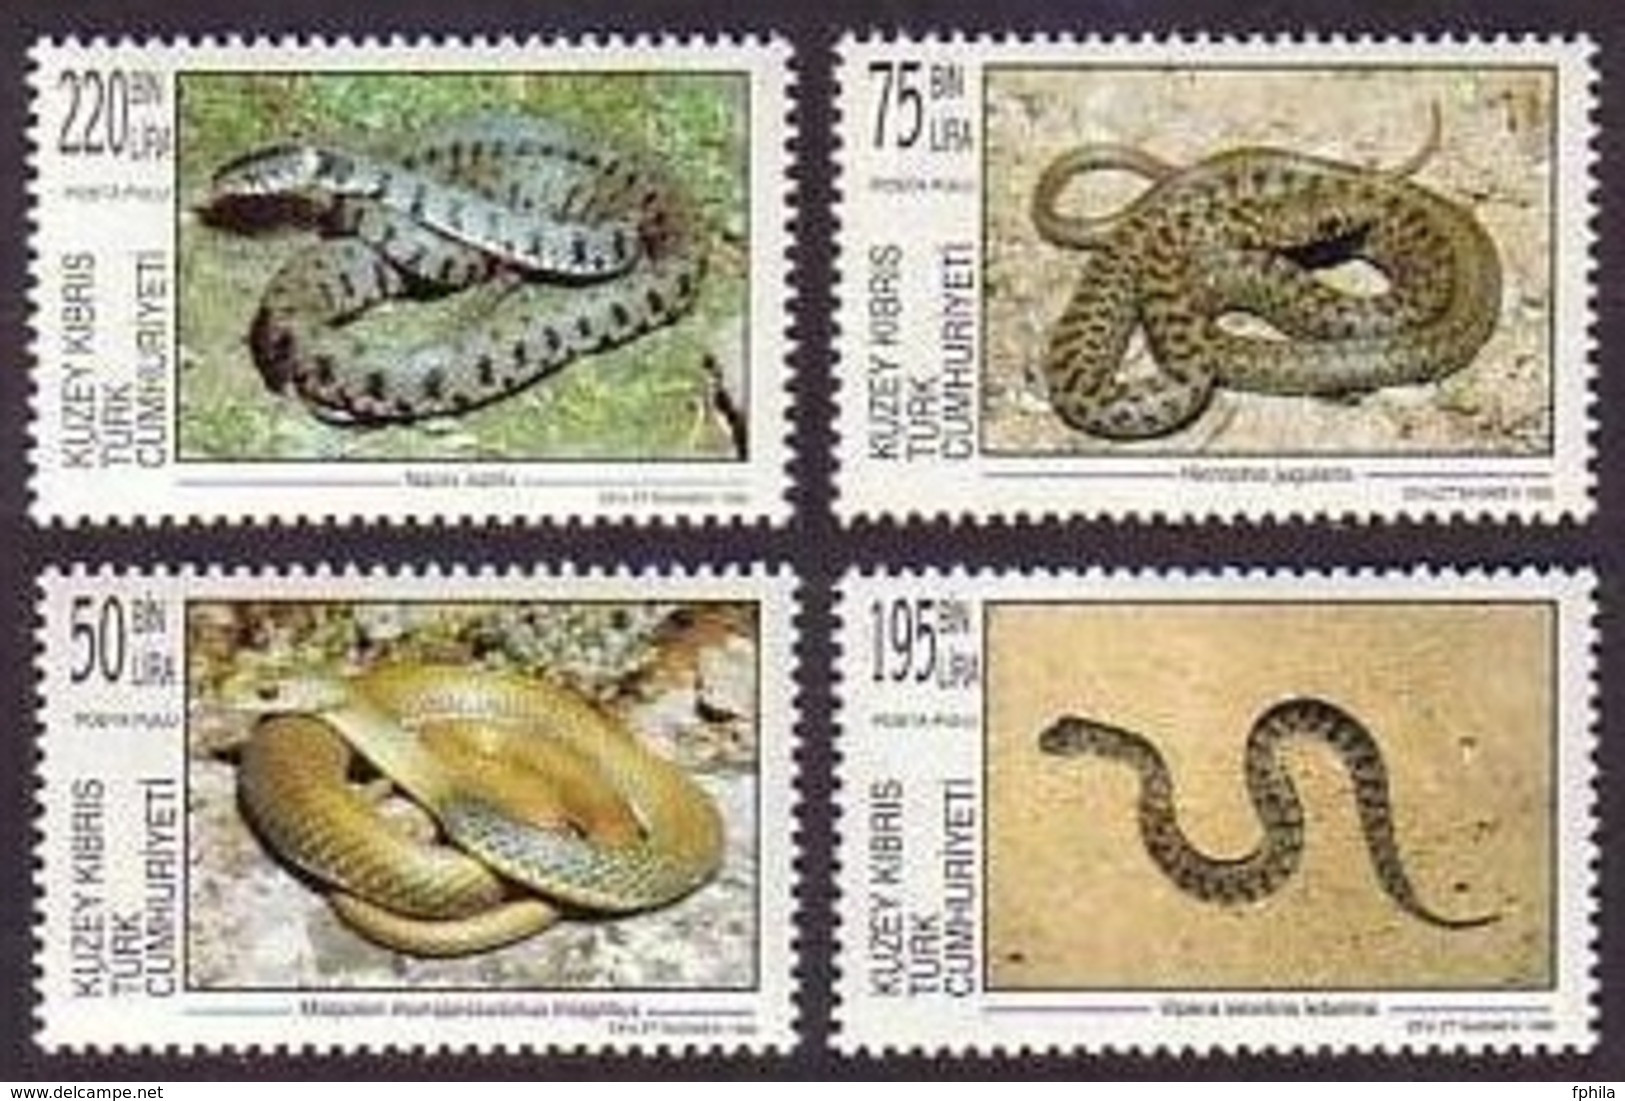 1999 NORTH CYPRUS SNAKES MNH ** - Serpents